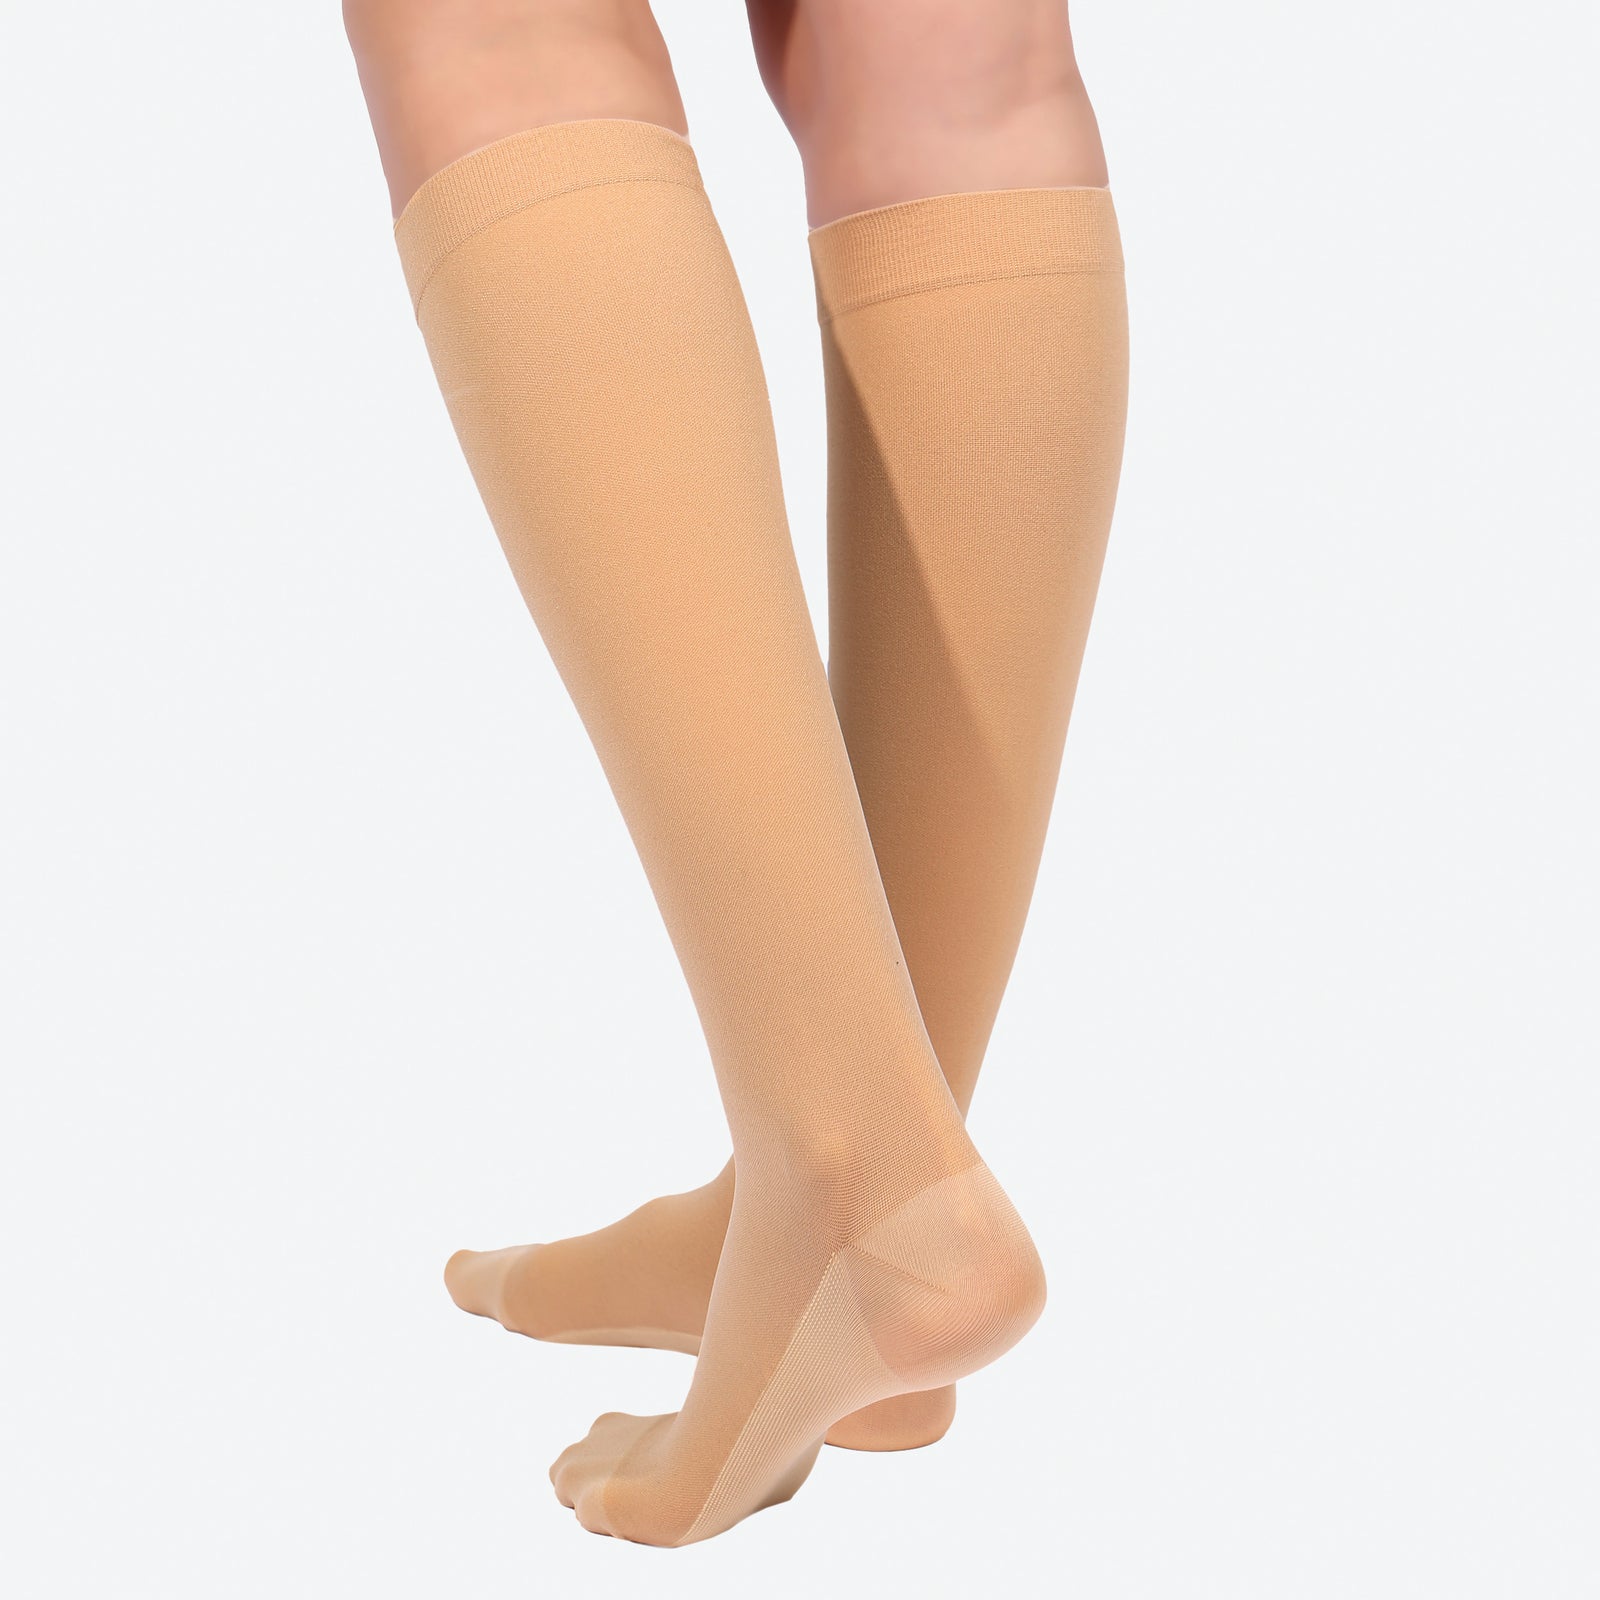  CopperJoint Copper Compression Socks for Women & Men - Diabetic  Socks, Improves Circulation, Reduces Swelling & Pain - For Nurses, Running,  & Everyday Use - Copper Infused Nylon (Small) : Health & Household